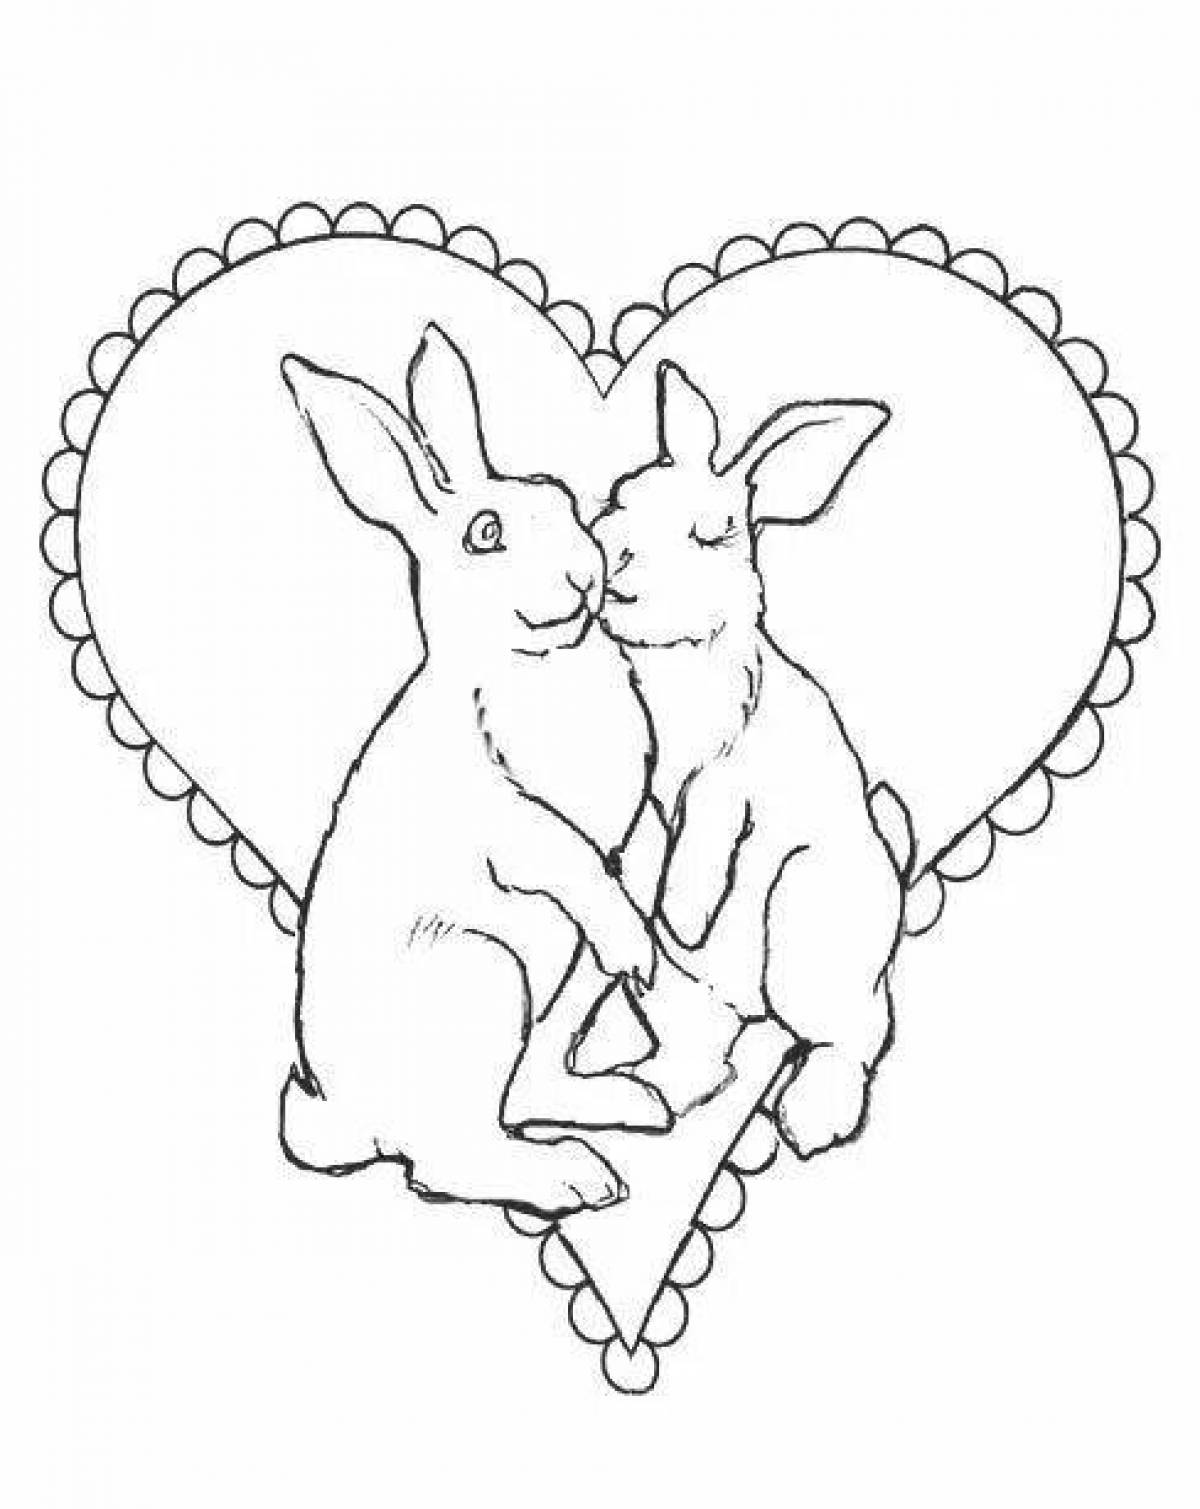 Naughty bunny coloring book with heart